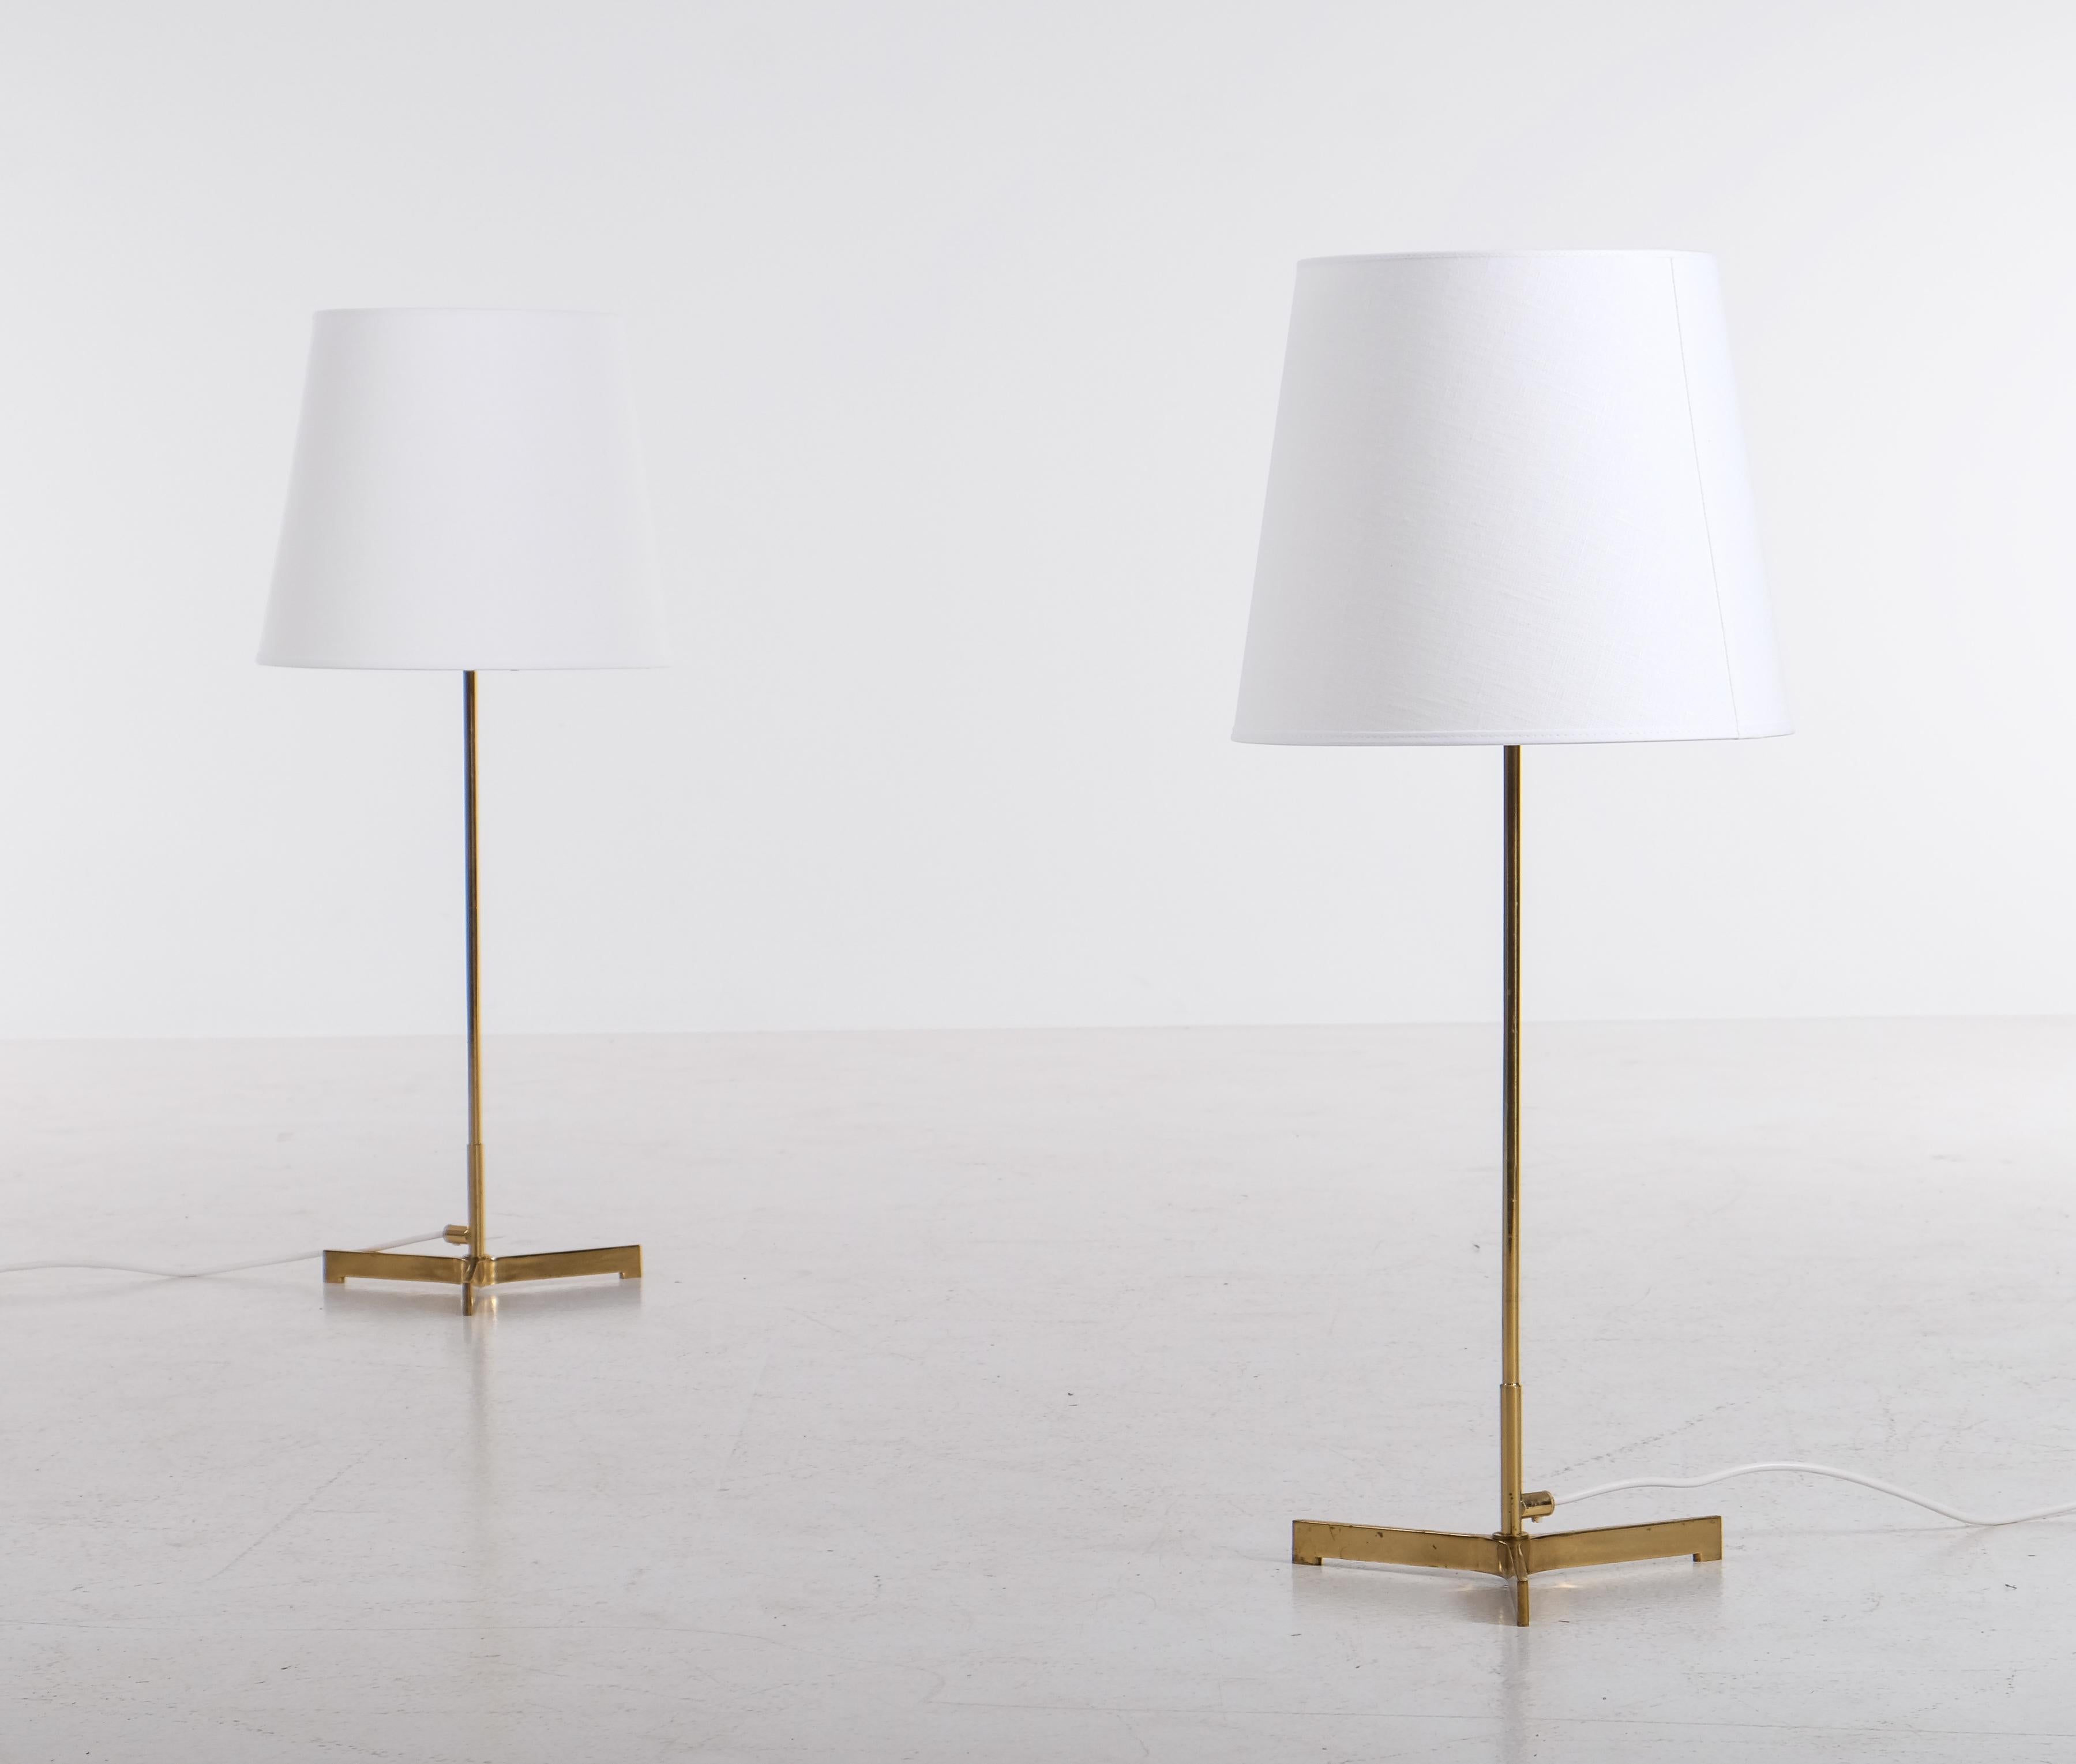 Pair of Hans-Agne Jakobsson Brass Table Lamps, 1960s For Sale 2